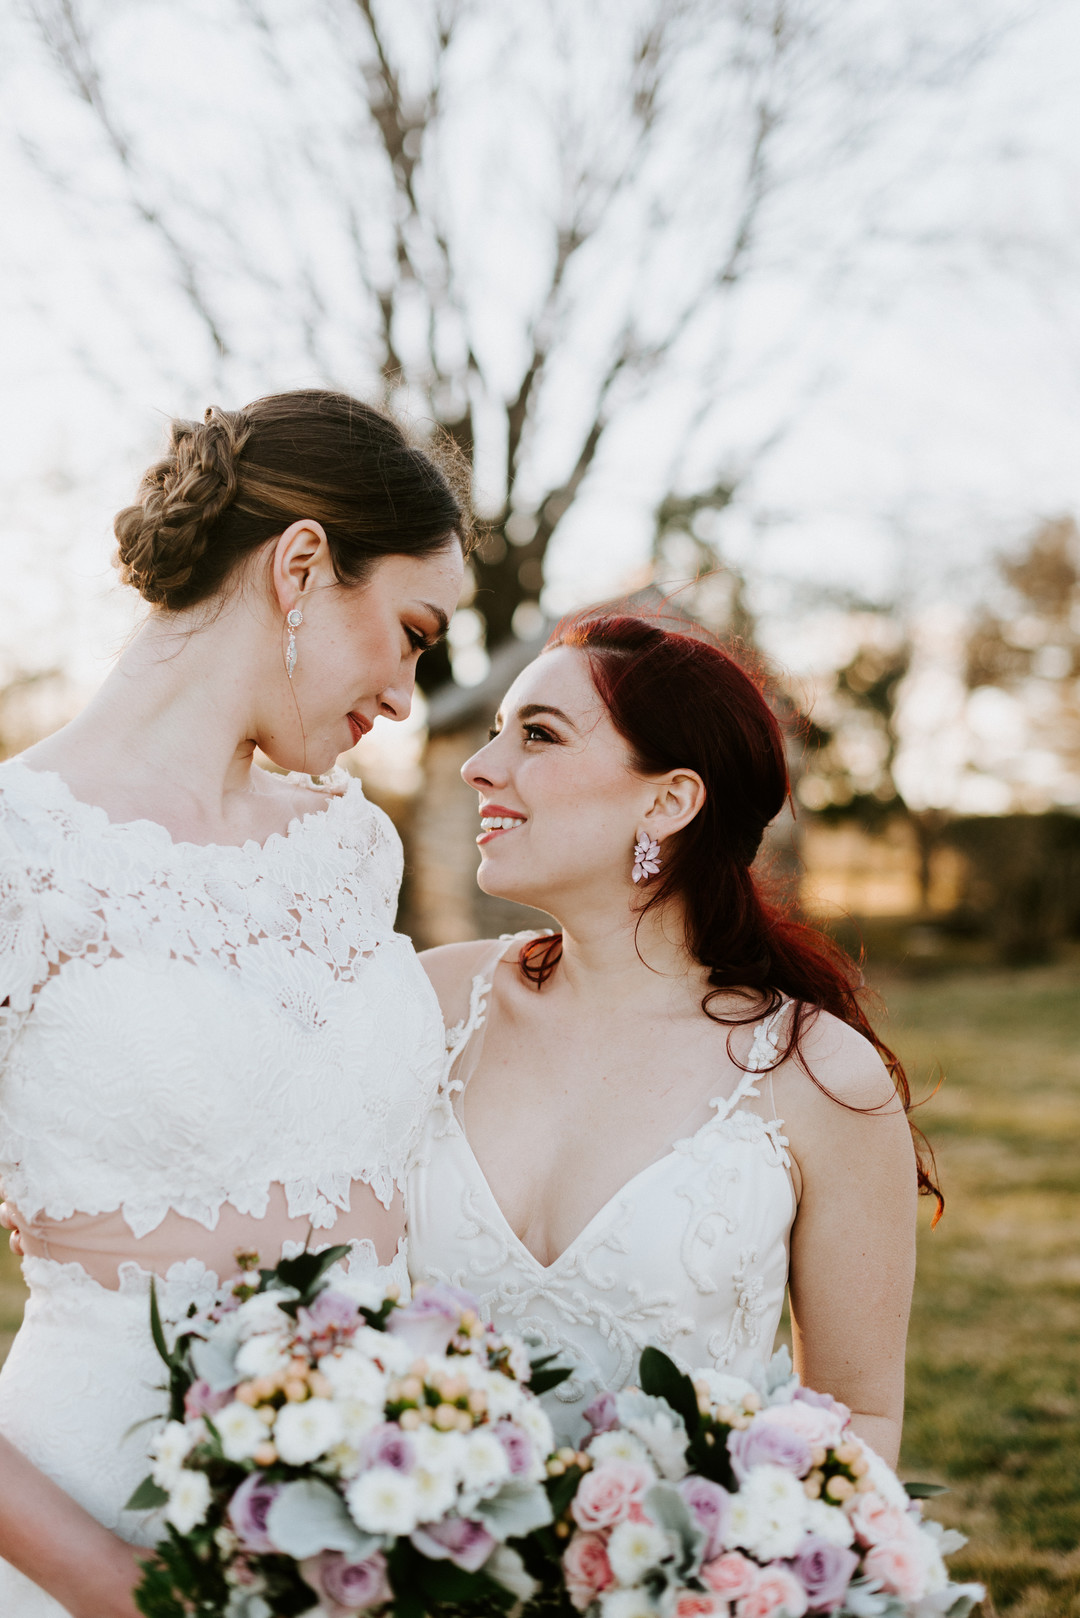 Rustic, moody farm wedding inspiration in Purcellville, Virginia two brides two grooms double wedding styled shoot